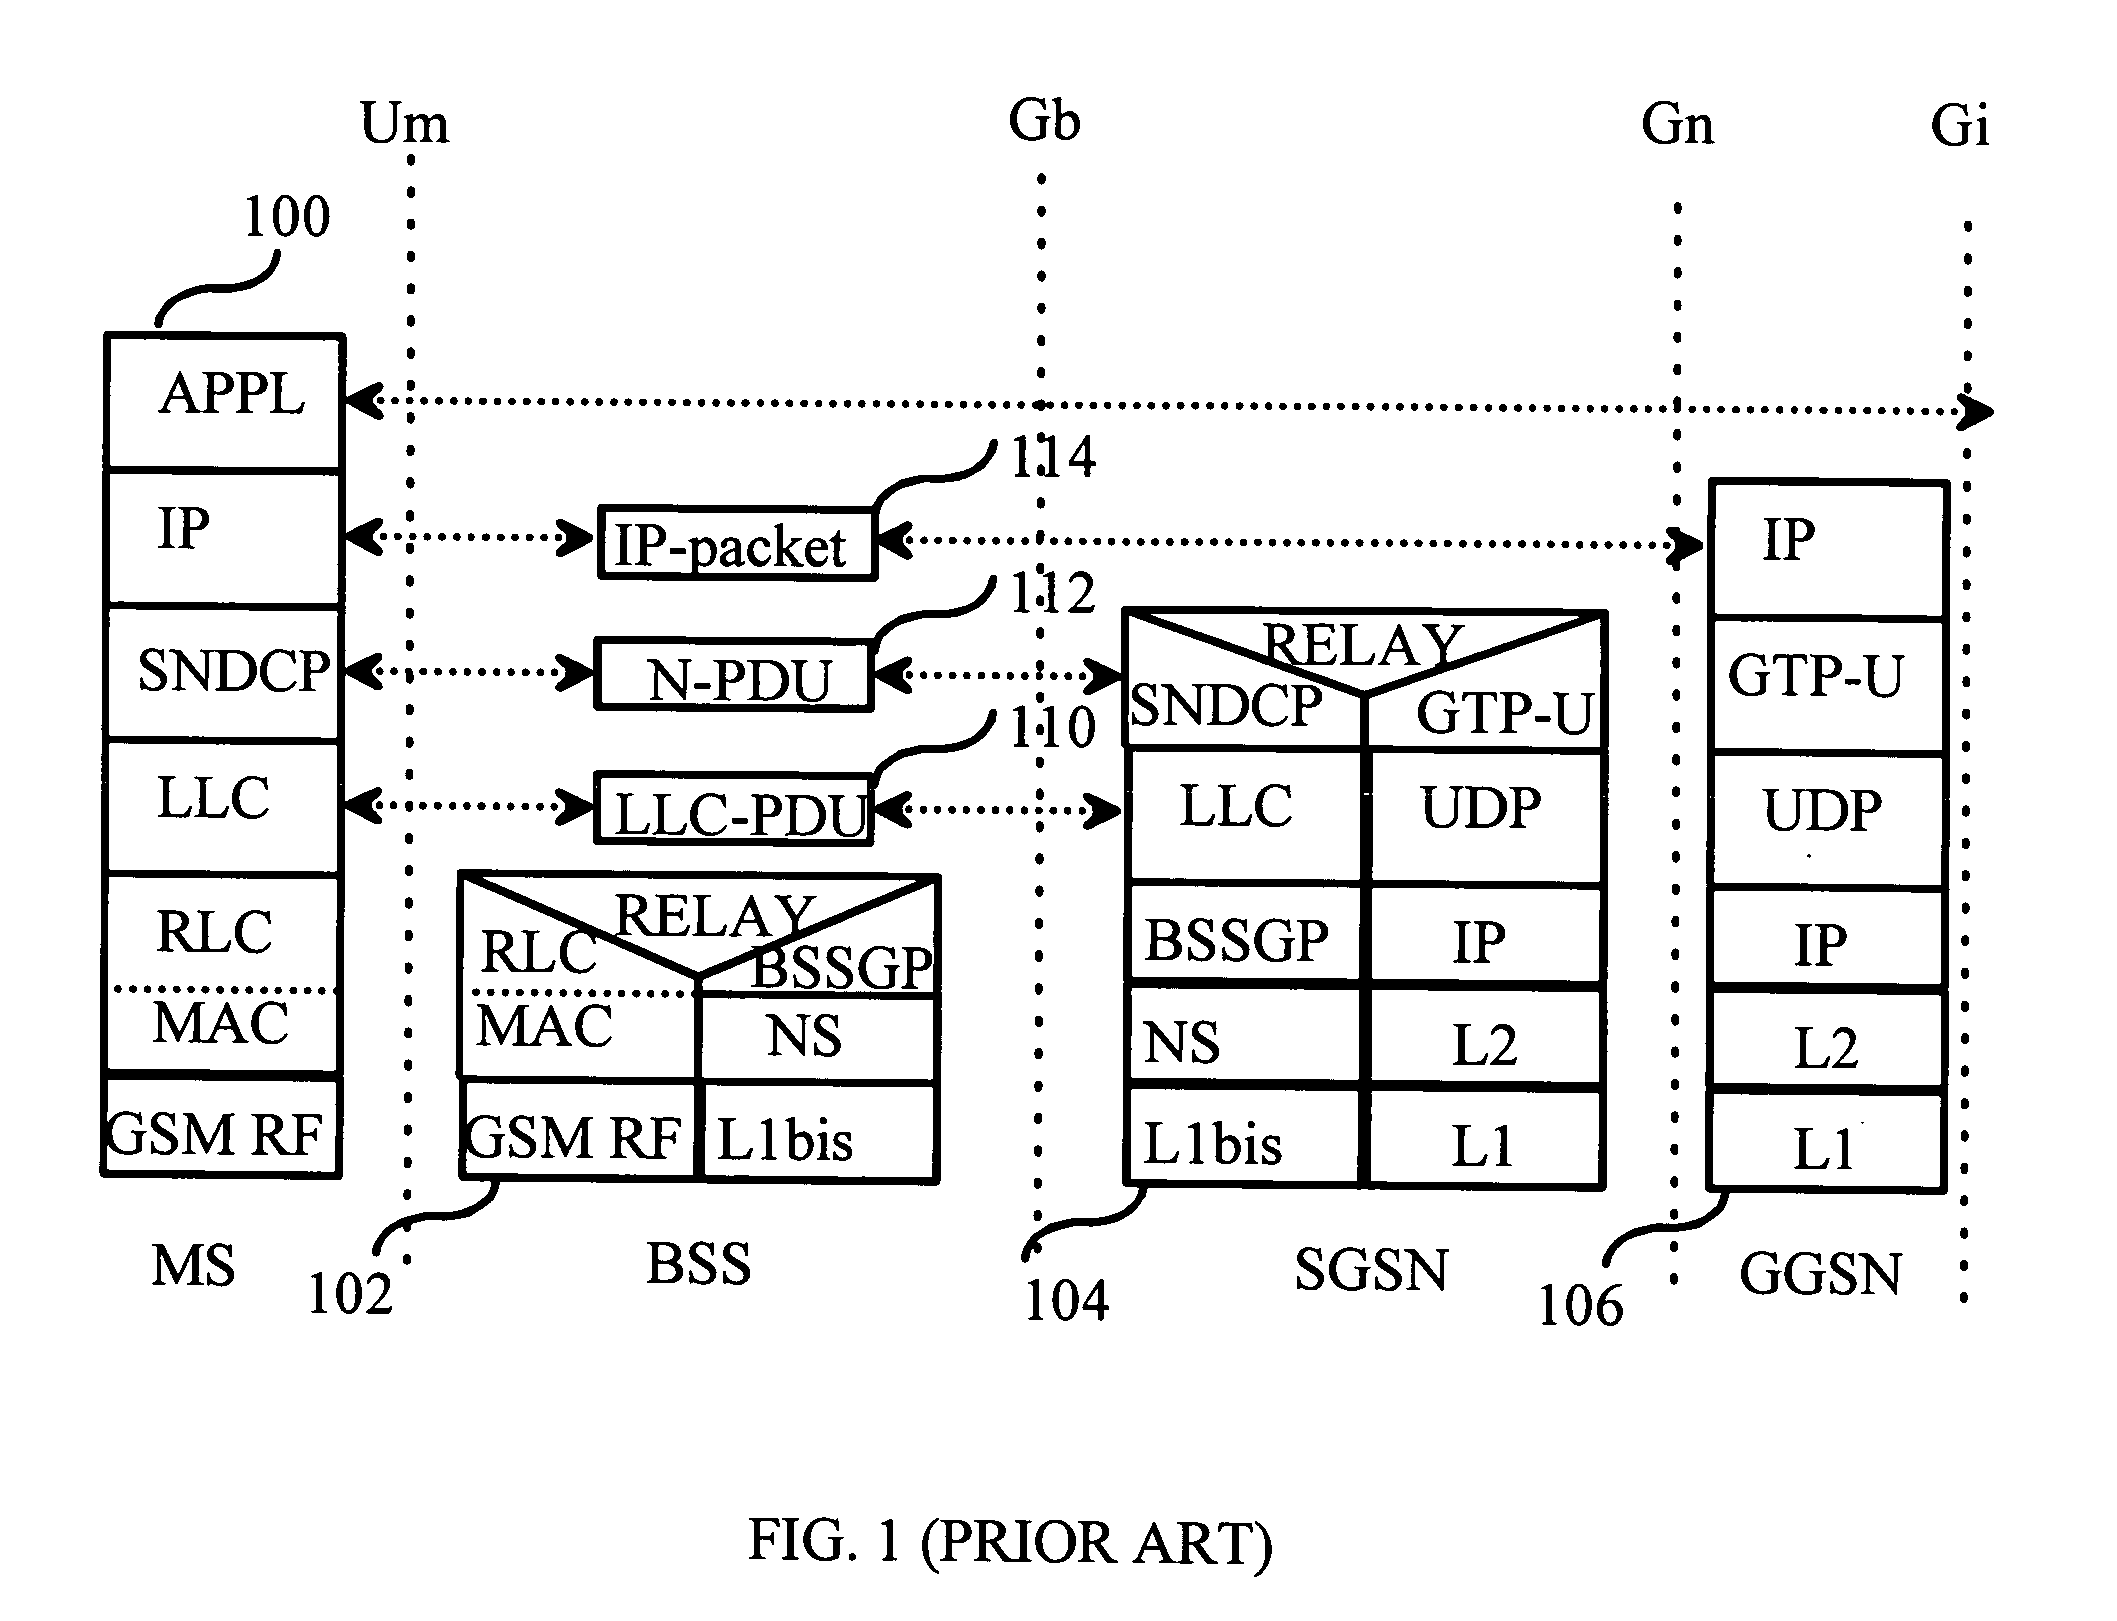 Transferring compression parameters in a mobile communication system